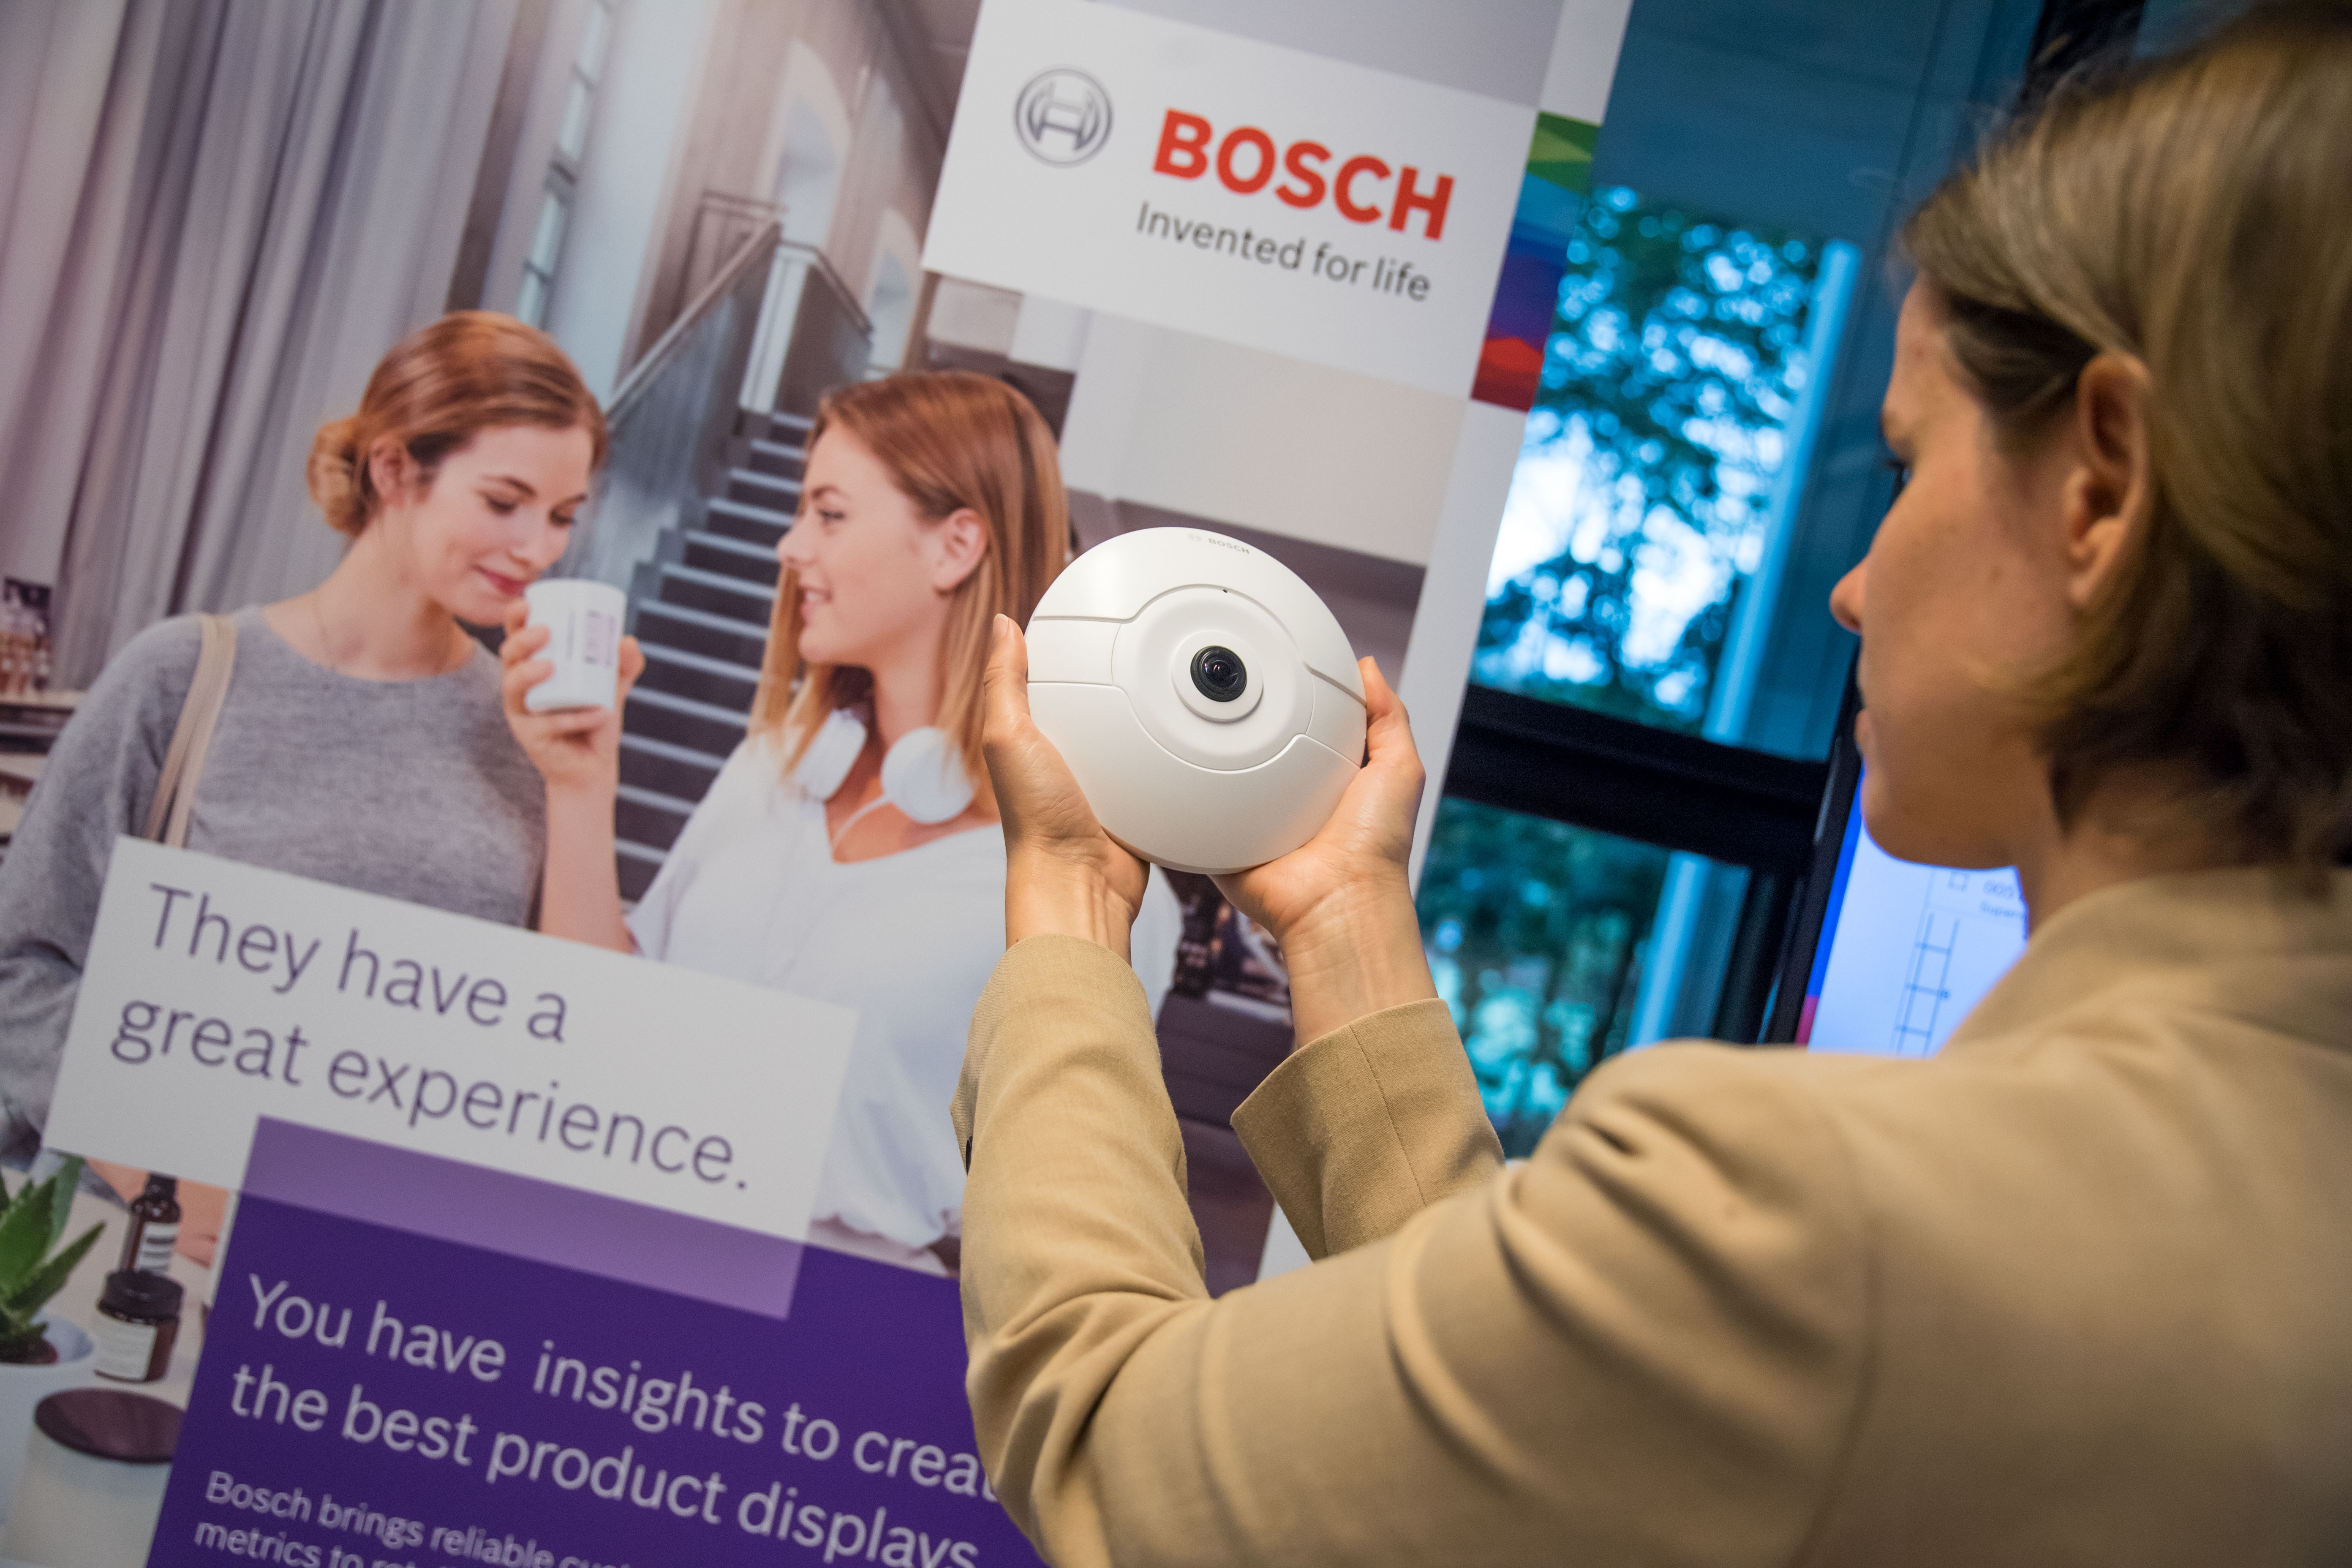 Pressegespräch Bosch Energy and Building Technology 2017